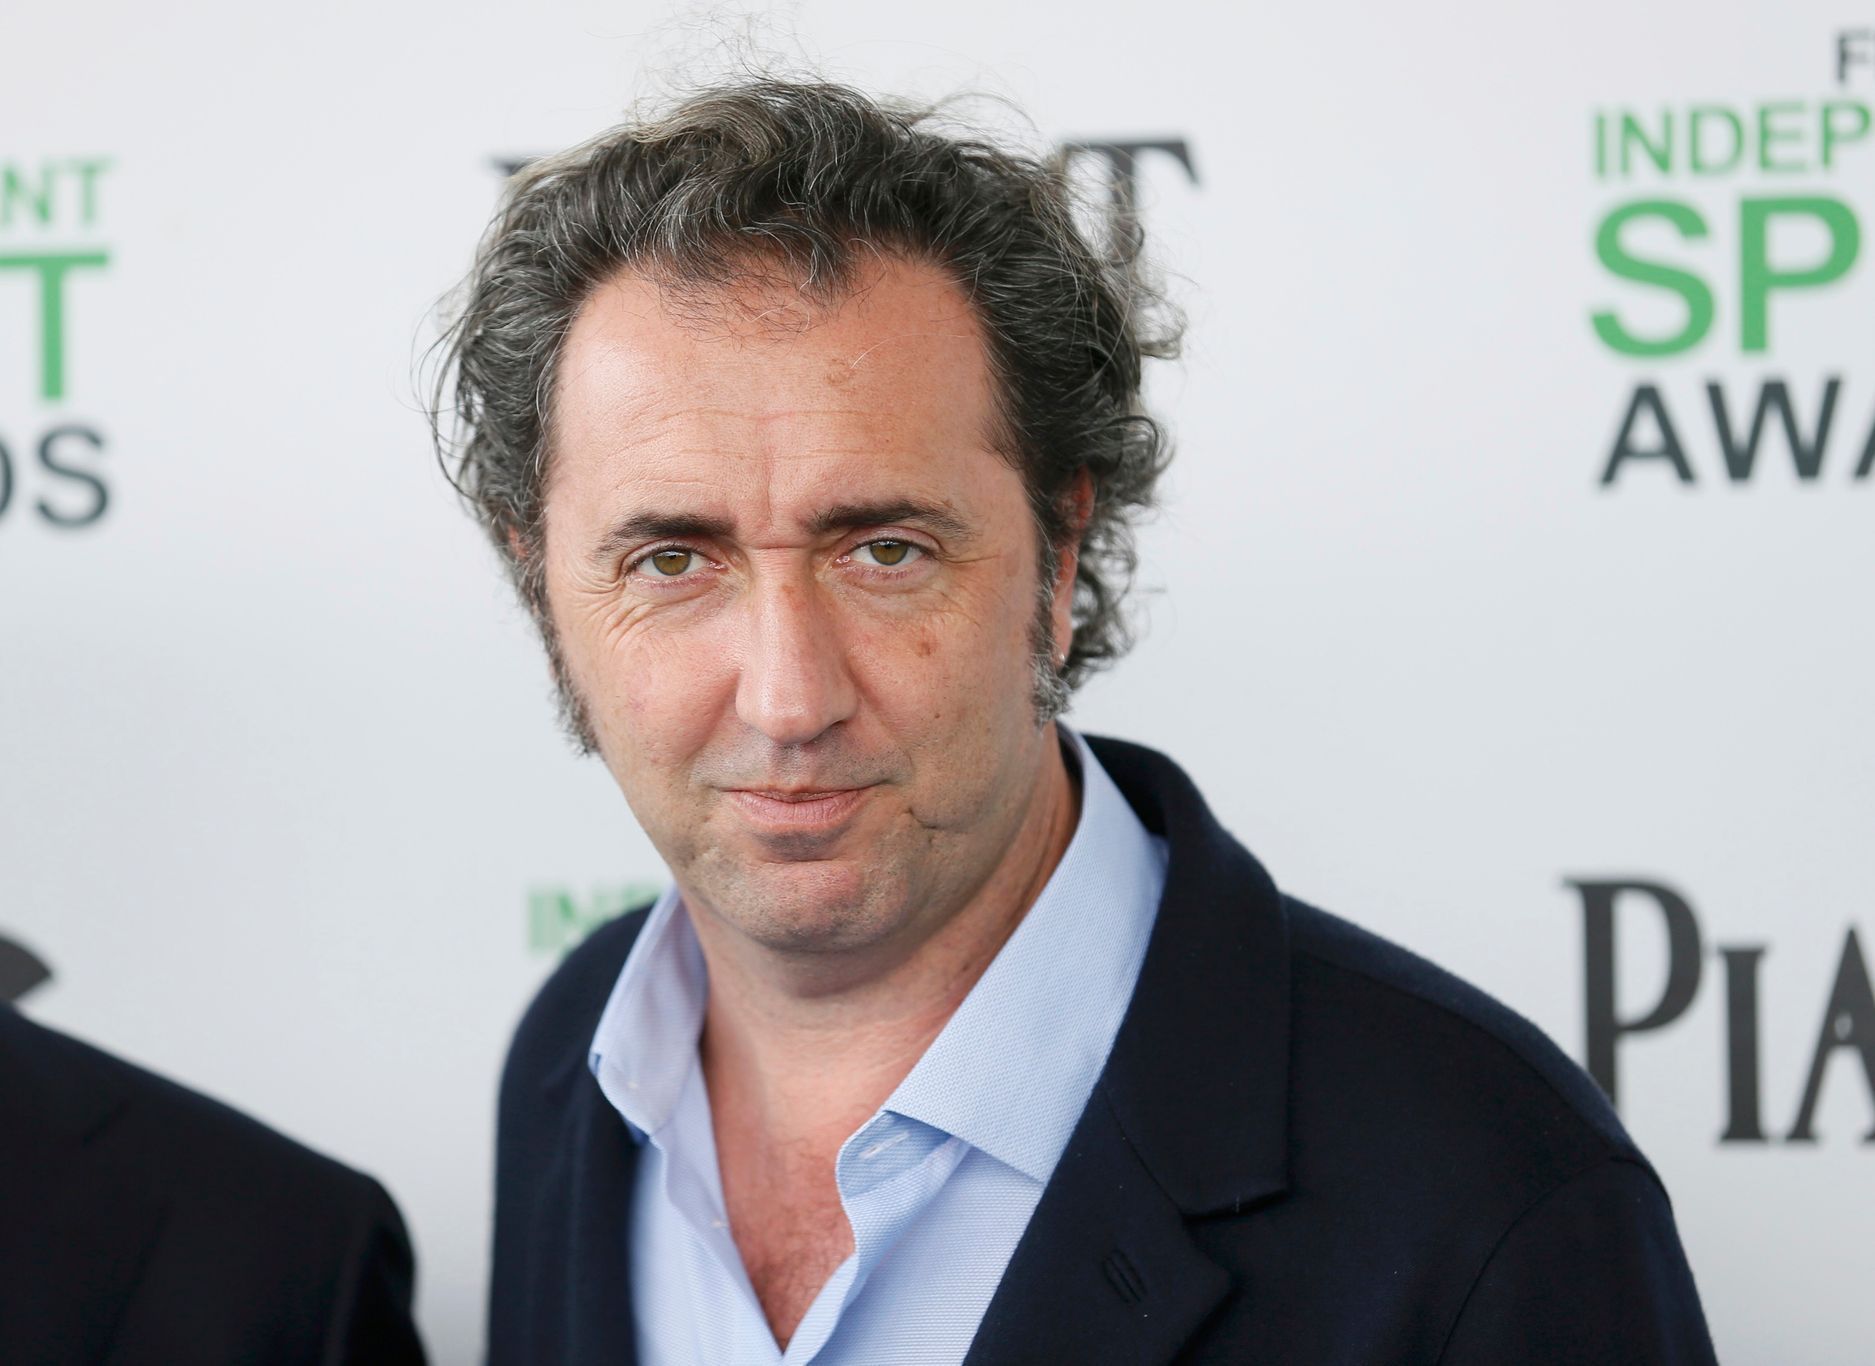 Director Paolo Sorrentino arrives at the 2014 Film Independent Spirit Awards in Santa Monica